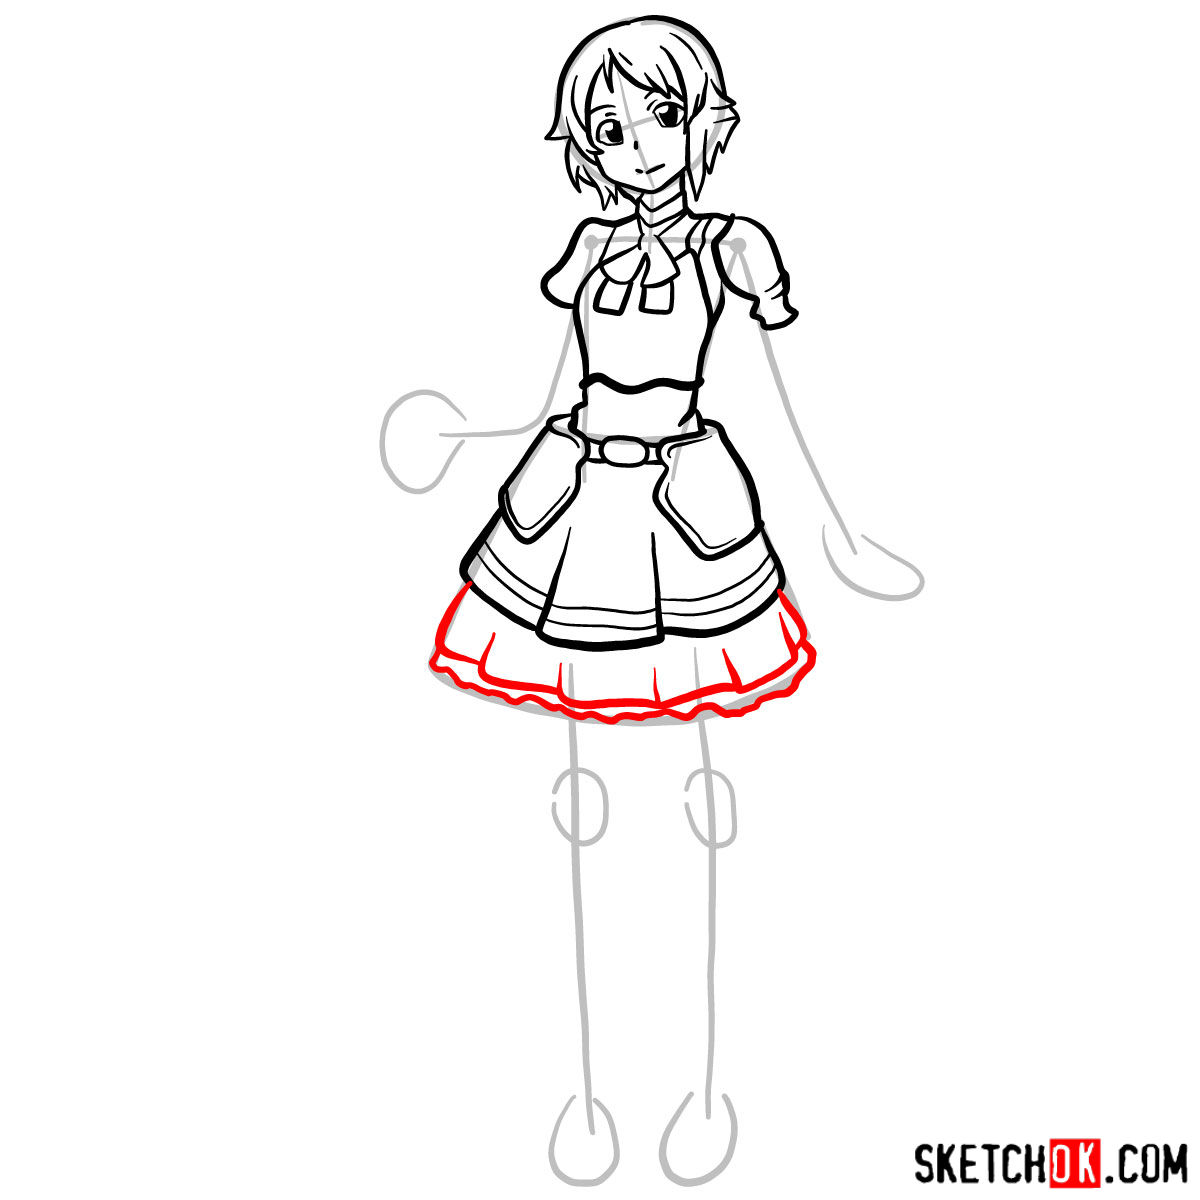 How to draw Lisbeth from Sword Art Online - step 10